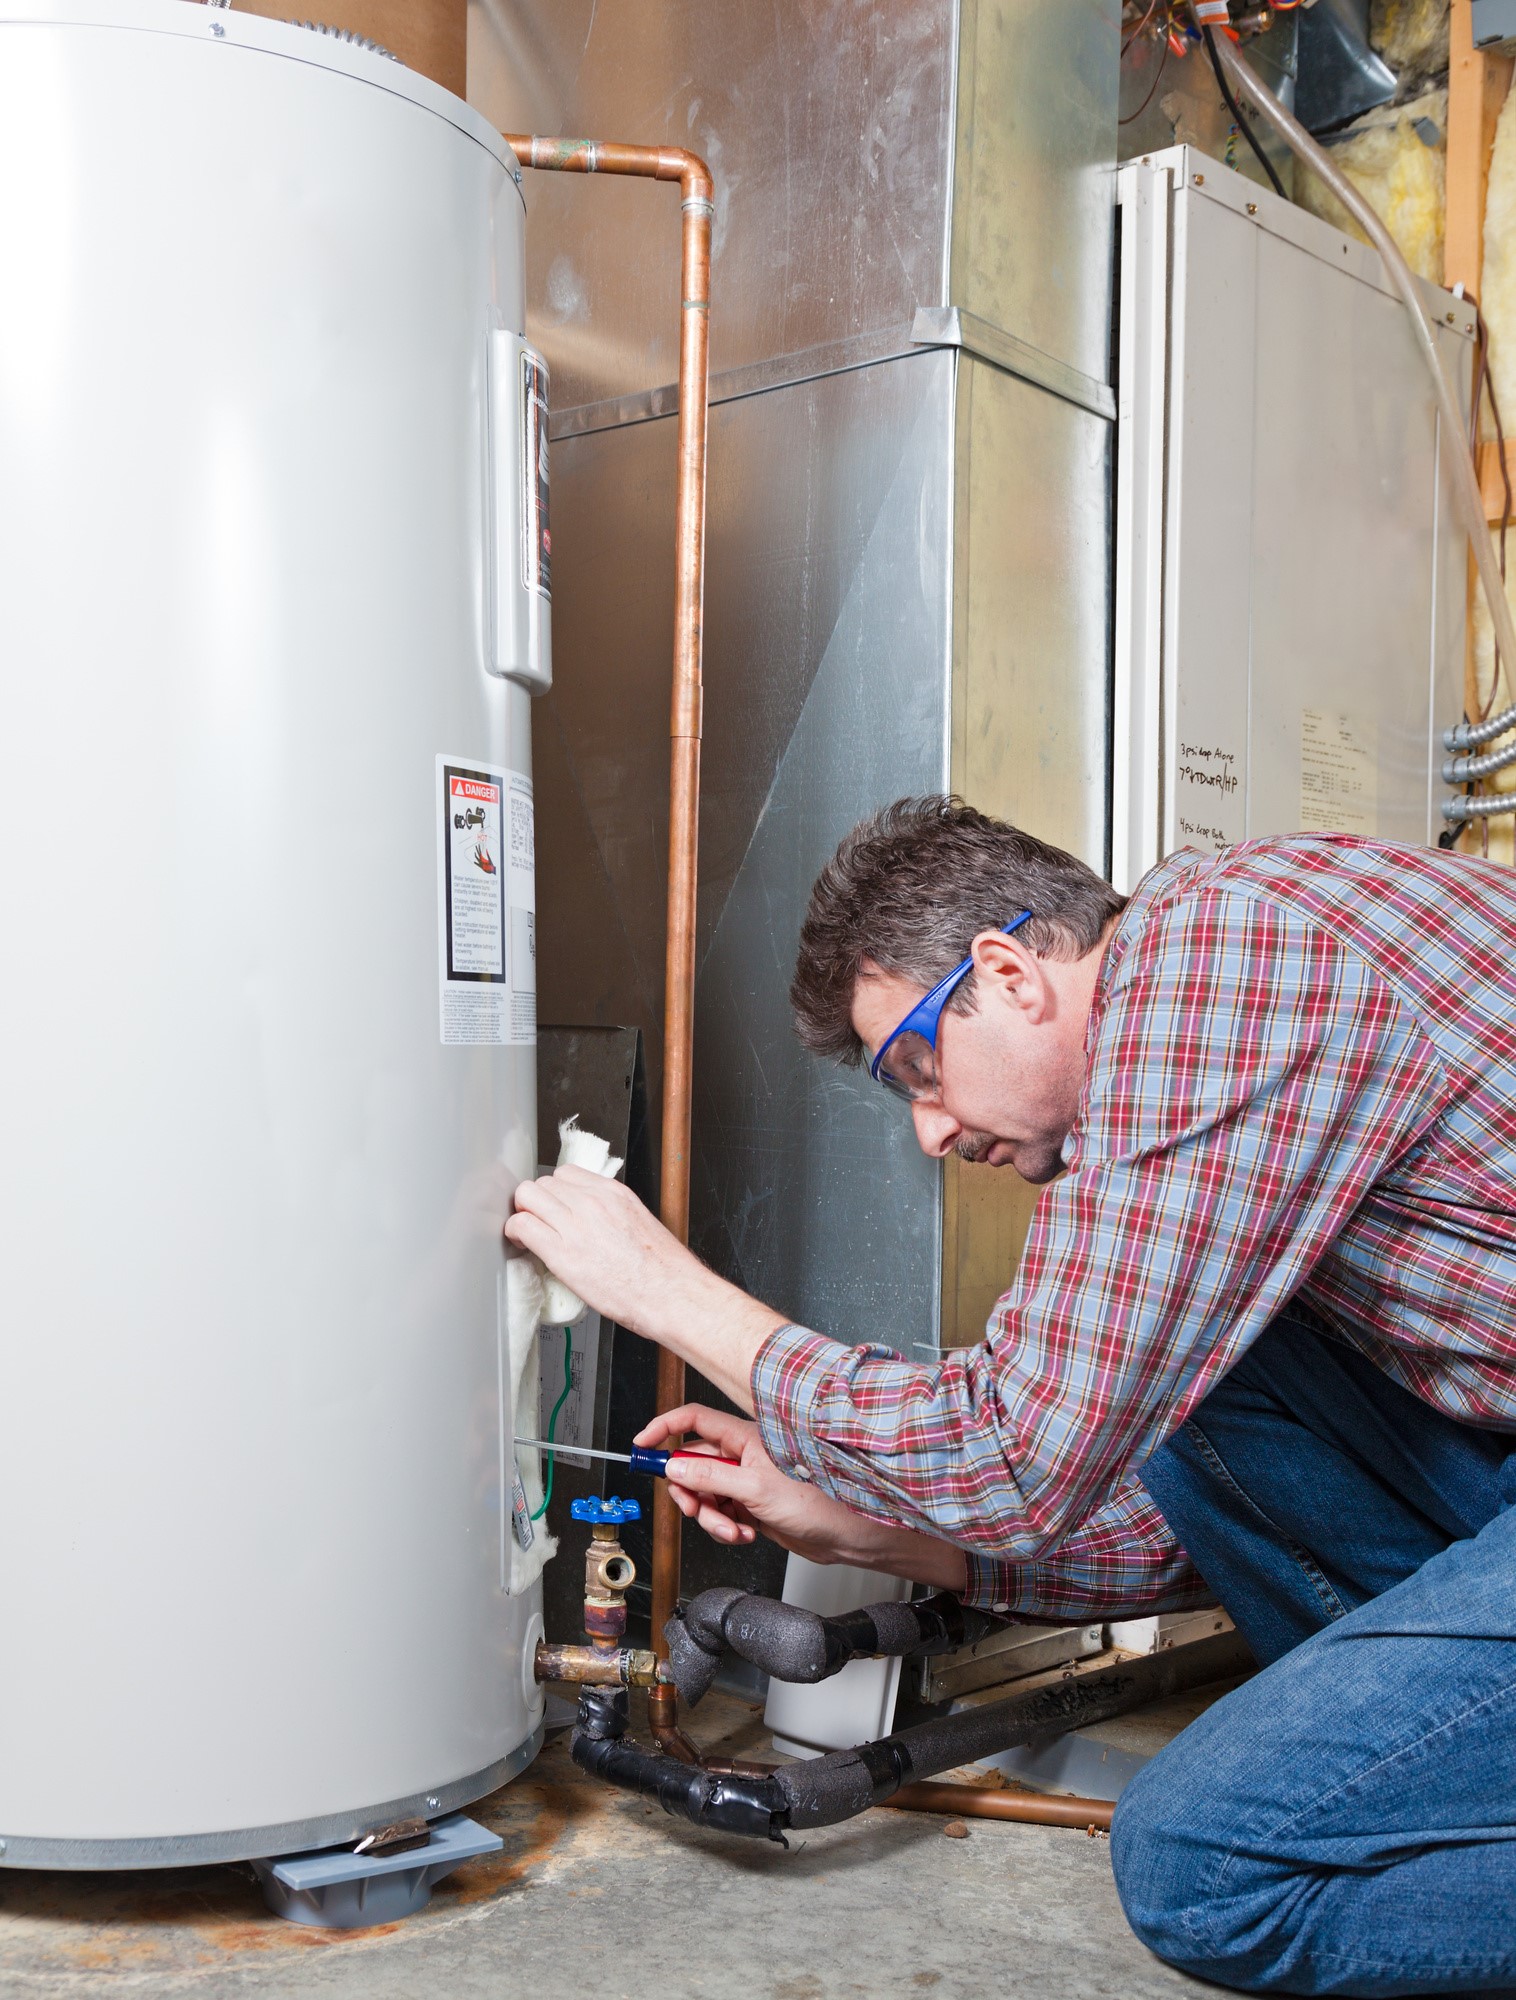 Why Is My Water Heater Not Working?